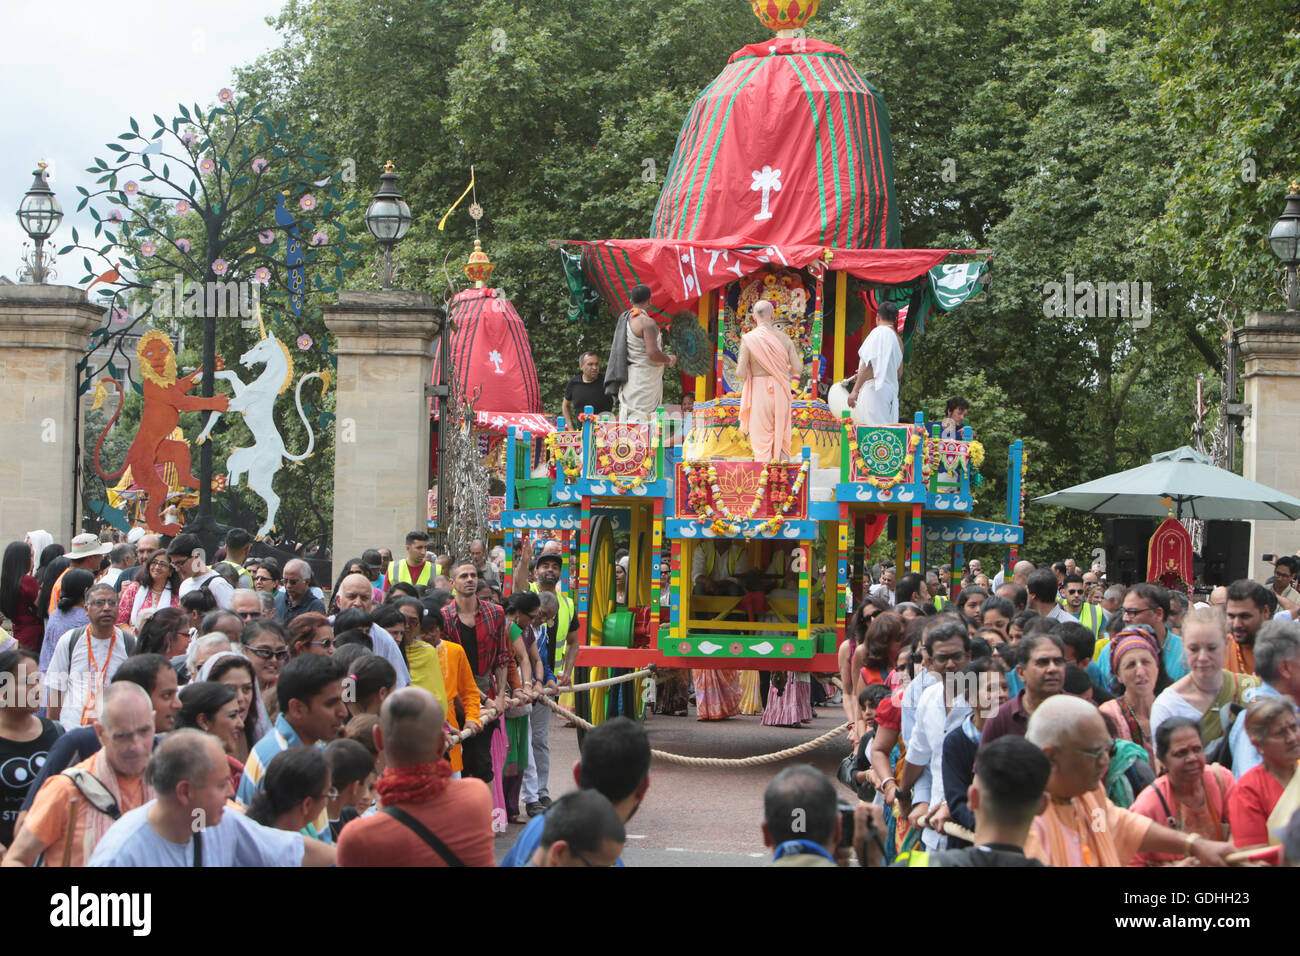 London.UK 17 July 2016 Fresh from celebrating  50 years since the Incorporation of ISKCON, International Society for Krishna Consciousness,the 48th Central London Rathayatra took to the streets of London to celebrate Lord Juggernaut ,Rathayatra  is a festival that involves moving deities Jagannath,Balabhadra,Subhadra on a wooden chariot @Paul Quezada-Neiman/Alamy Live News Stock Photo